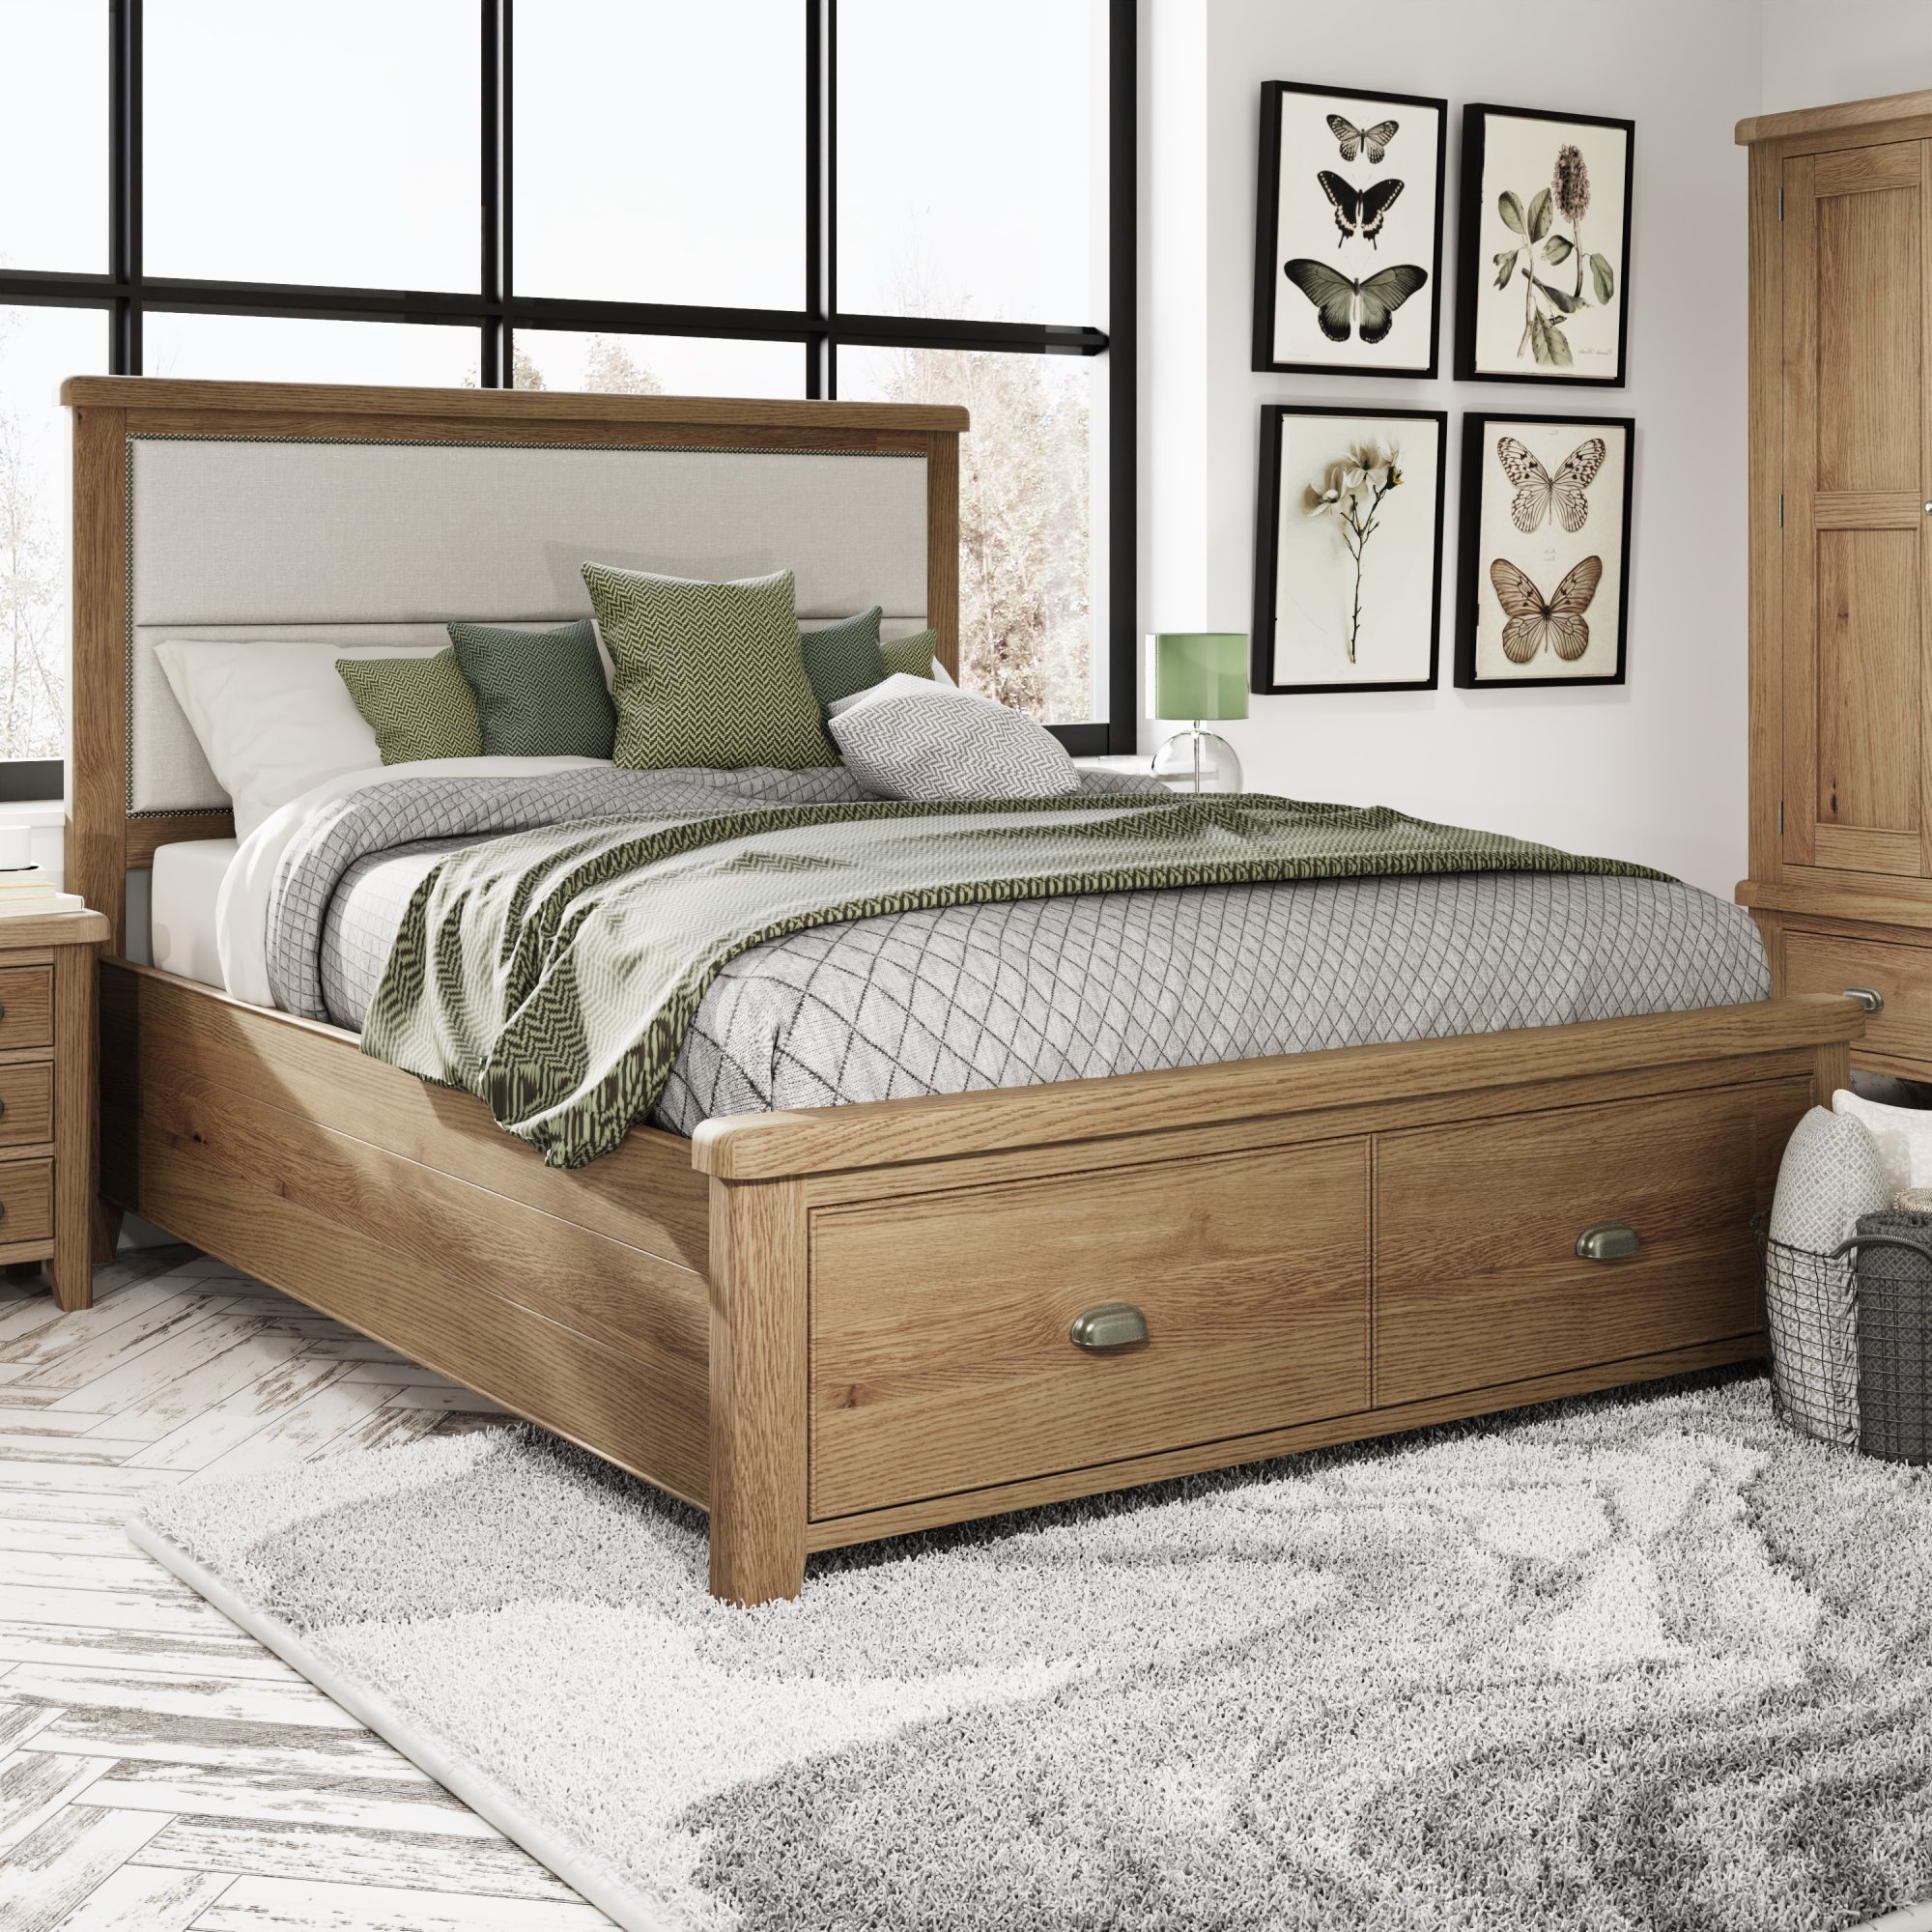 Heritage King Bed Frame and Headboard | Aldiss Furniture